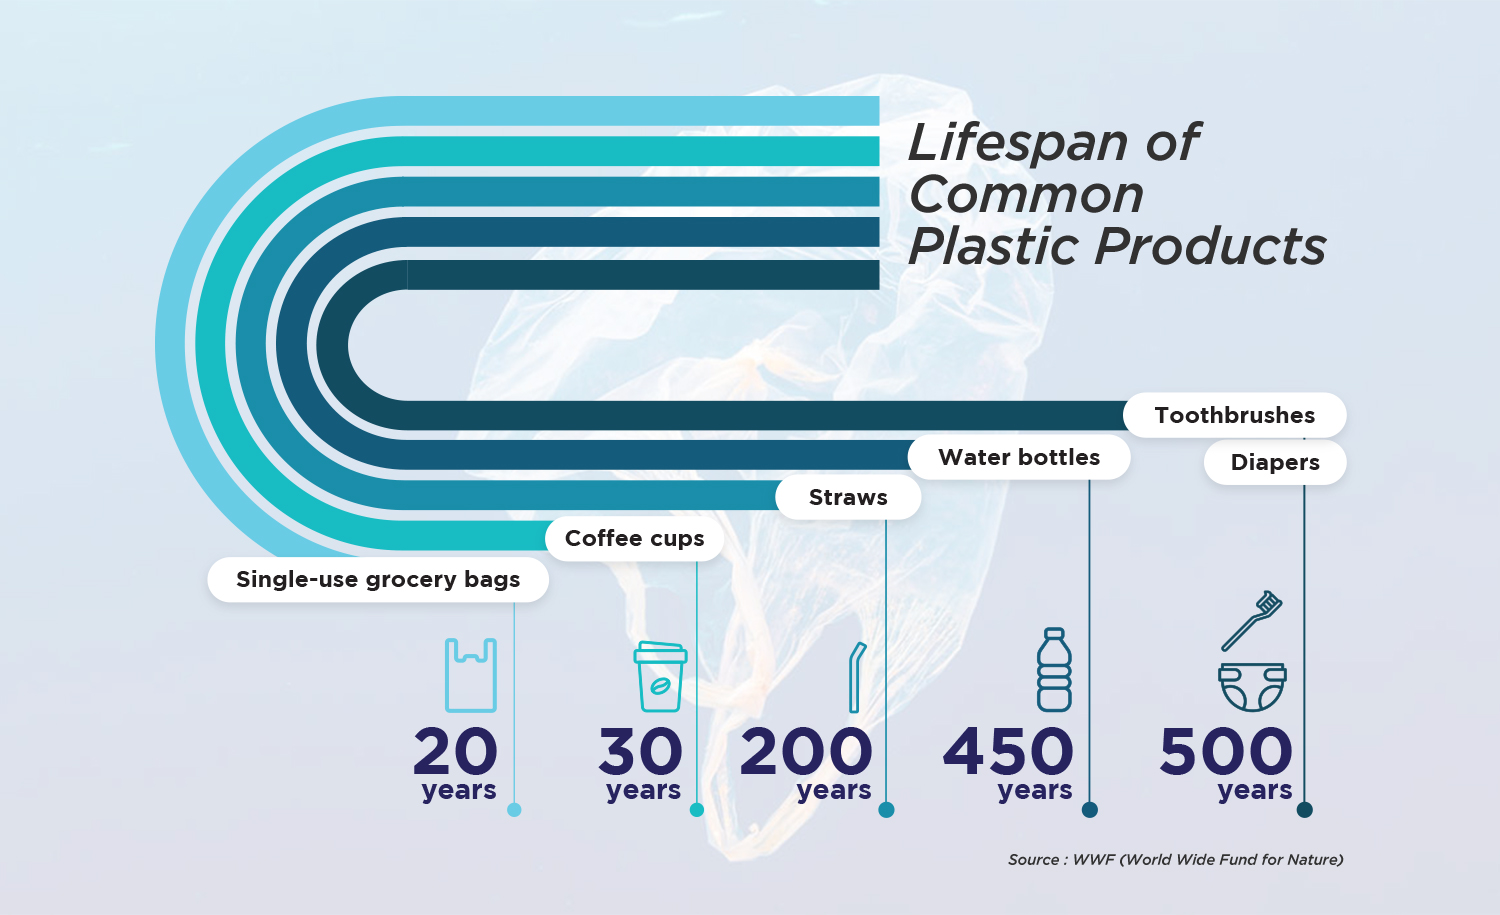 Lifespan of Common Plastic Products - Finding the plastic pollution solution